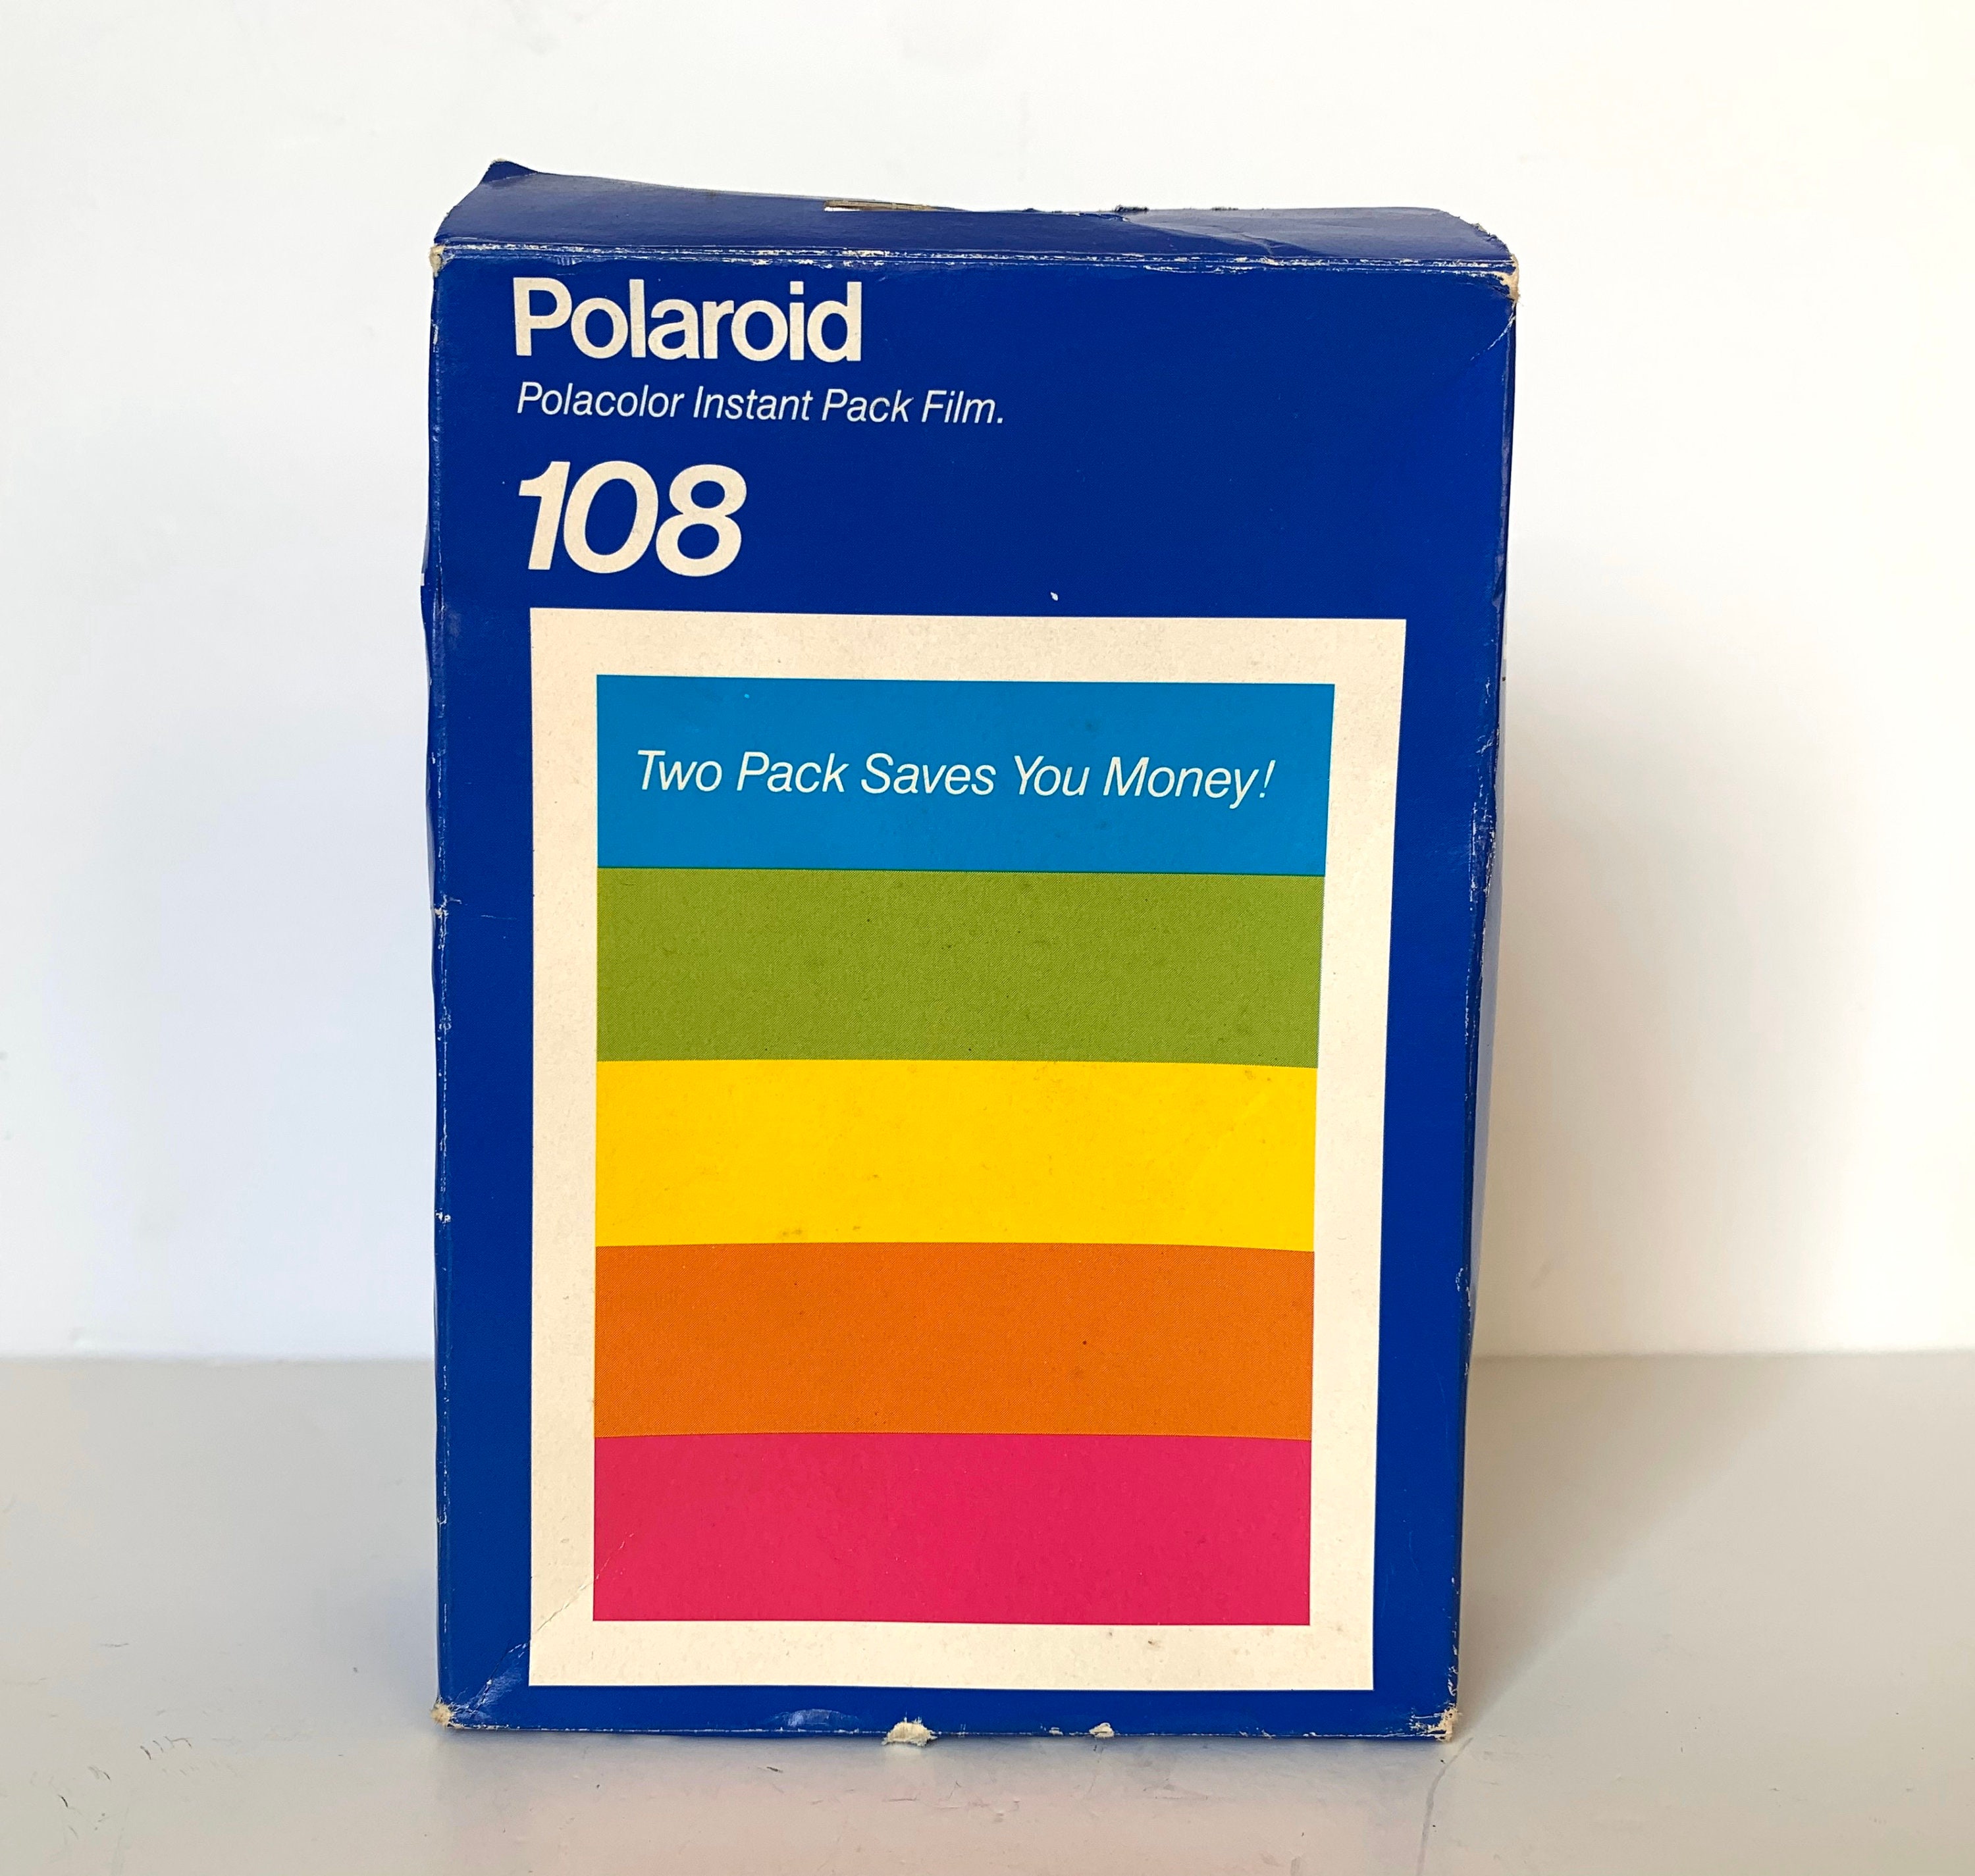 POLAROID 108 Polacolor Instant Pack Film Expired in 1990 - Etsy Israel